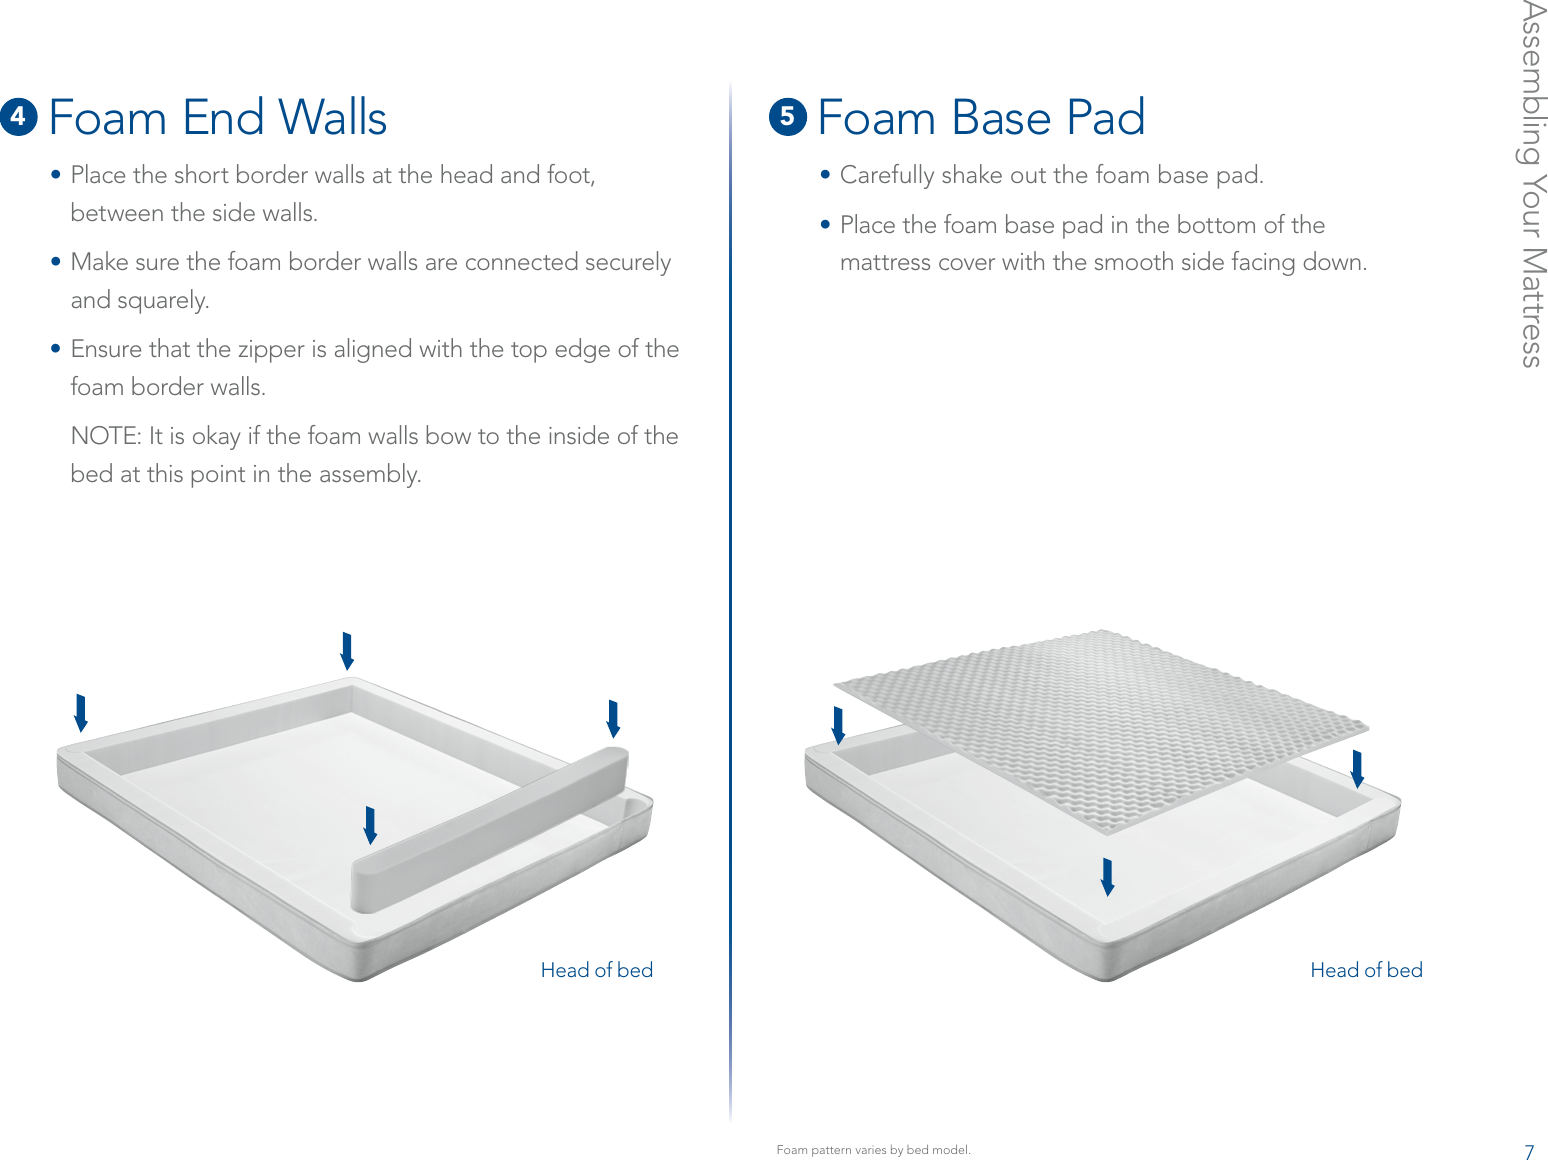 Assembling Your Mattress4 Foam End Walls•  Place the short border walls at the head and foot, between the side walls.•  Make sure the foam border walls are connected securely  and squarely.•  Ensure that the zipper is aligned with the top edge of the foam border walls.NOTE: It is okay if the foam walls bow to the inside of the bed at this point in the assembly.5 Foam Base Pad• Carefully shake out the foam base pad.• Place the foam base pad in the bottom of the  mattress cover with the smooth side facing down.Head of bed Head of bedFoam pattern varies by bed model. 7